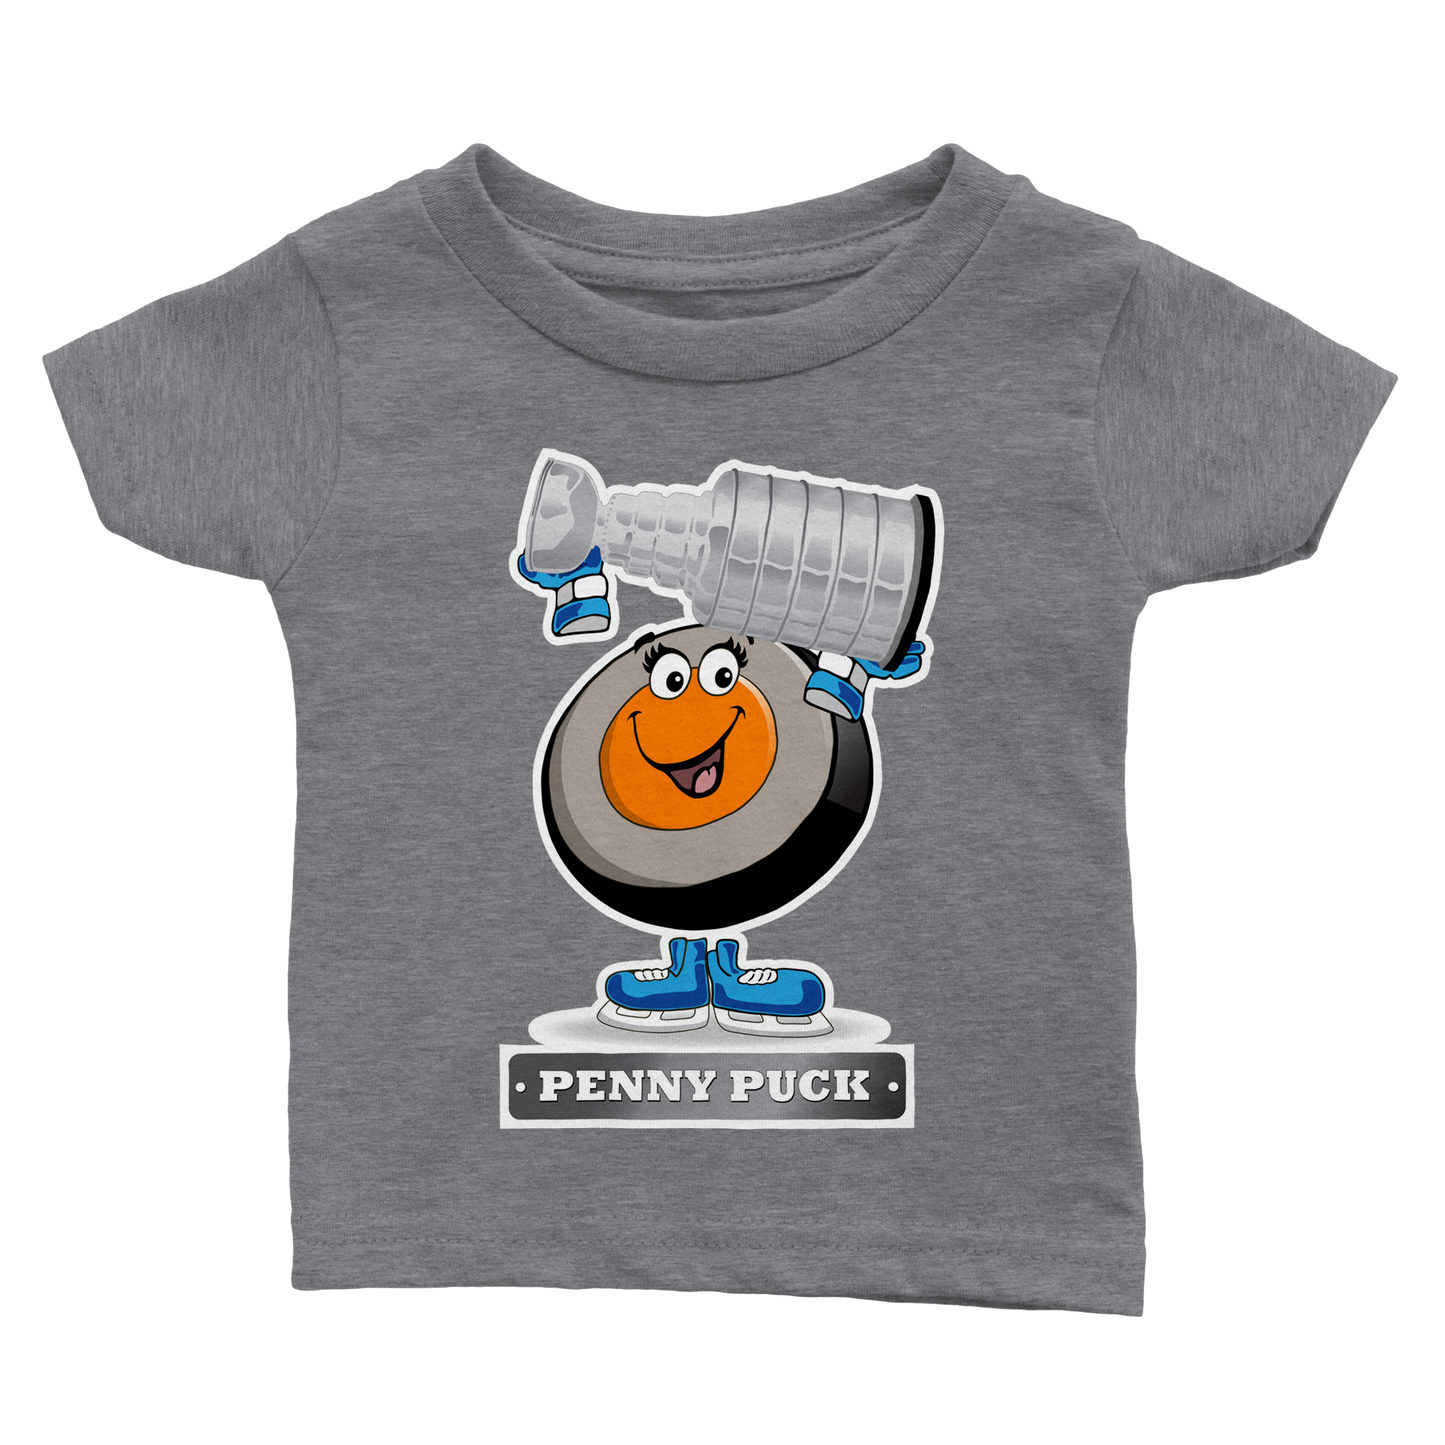 Penny Puck Stanley Cup Classic Baby Crewneck T-shirt